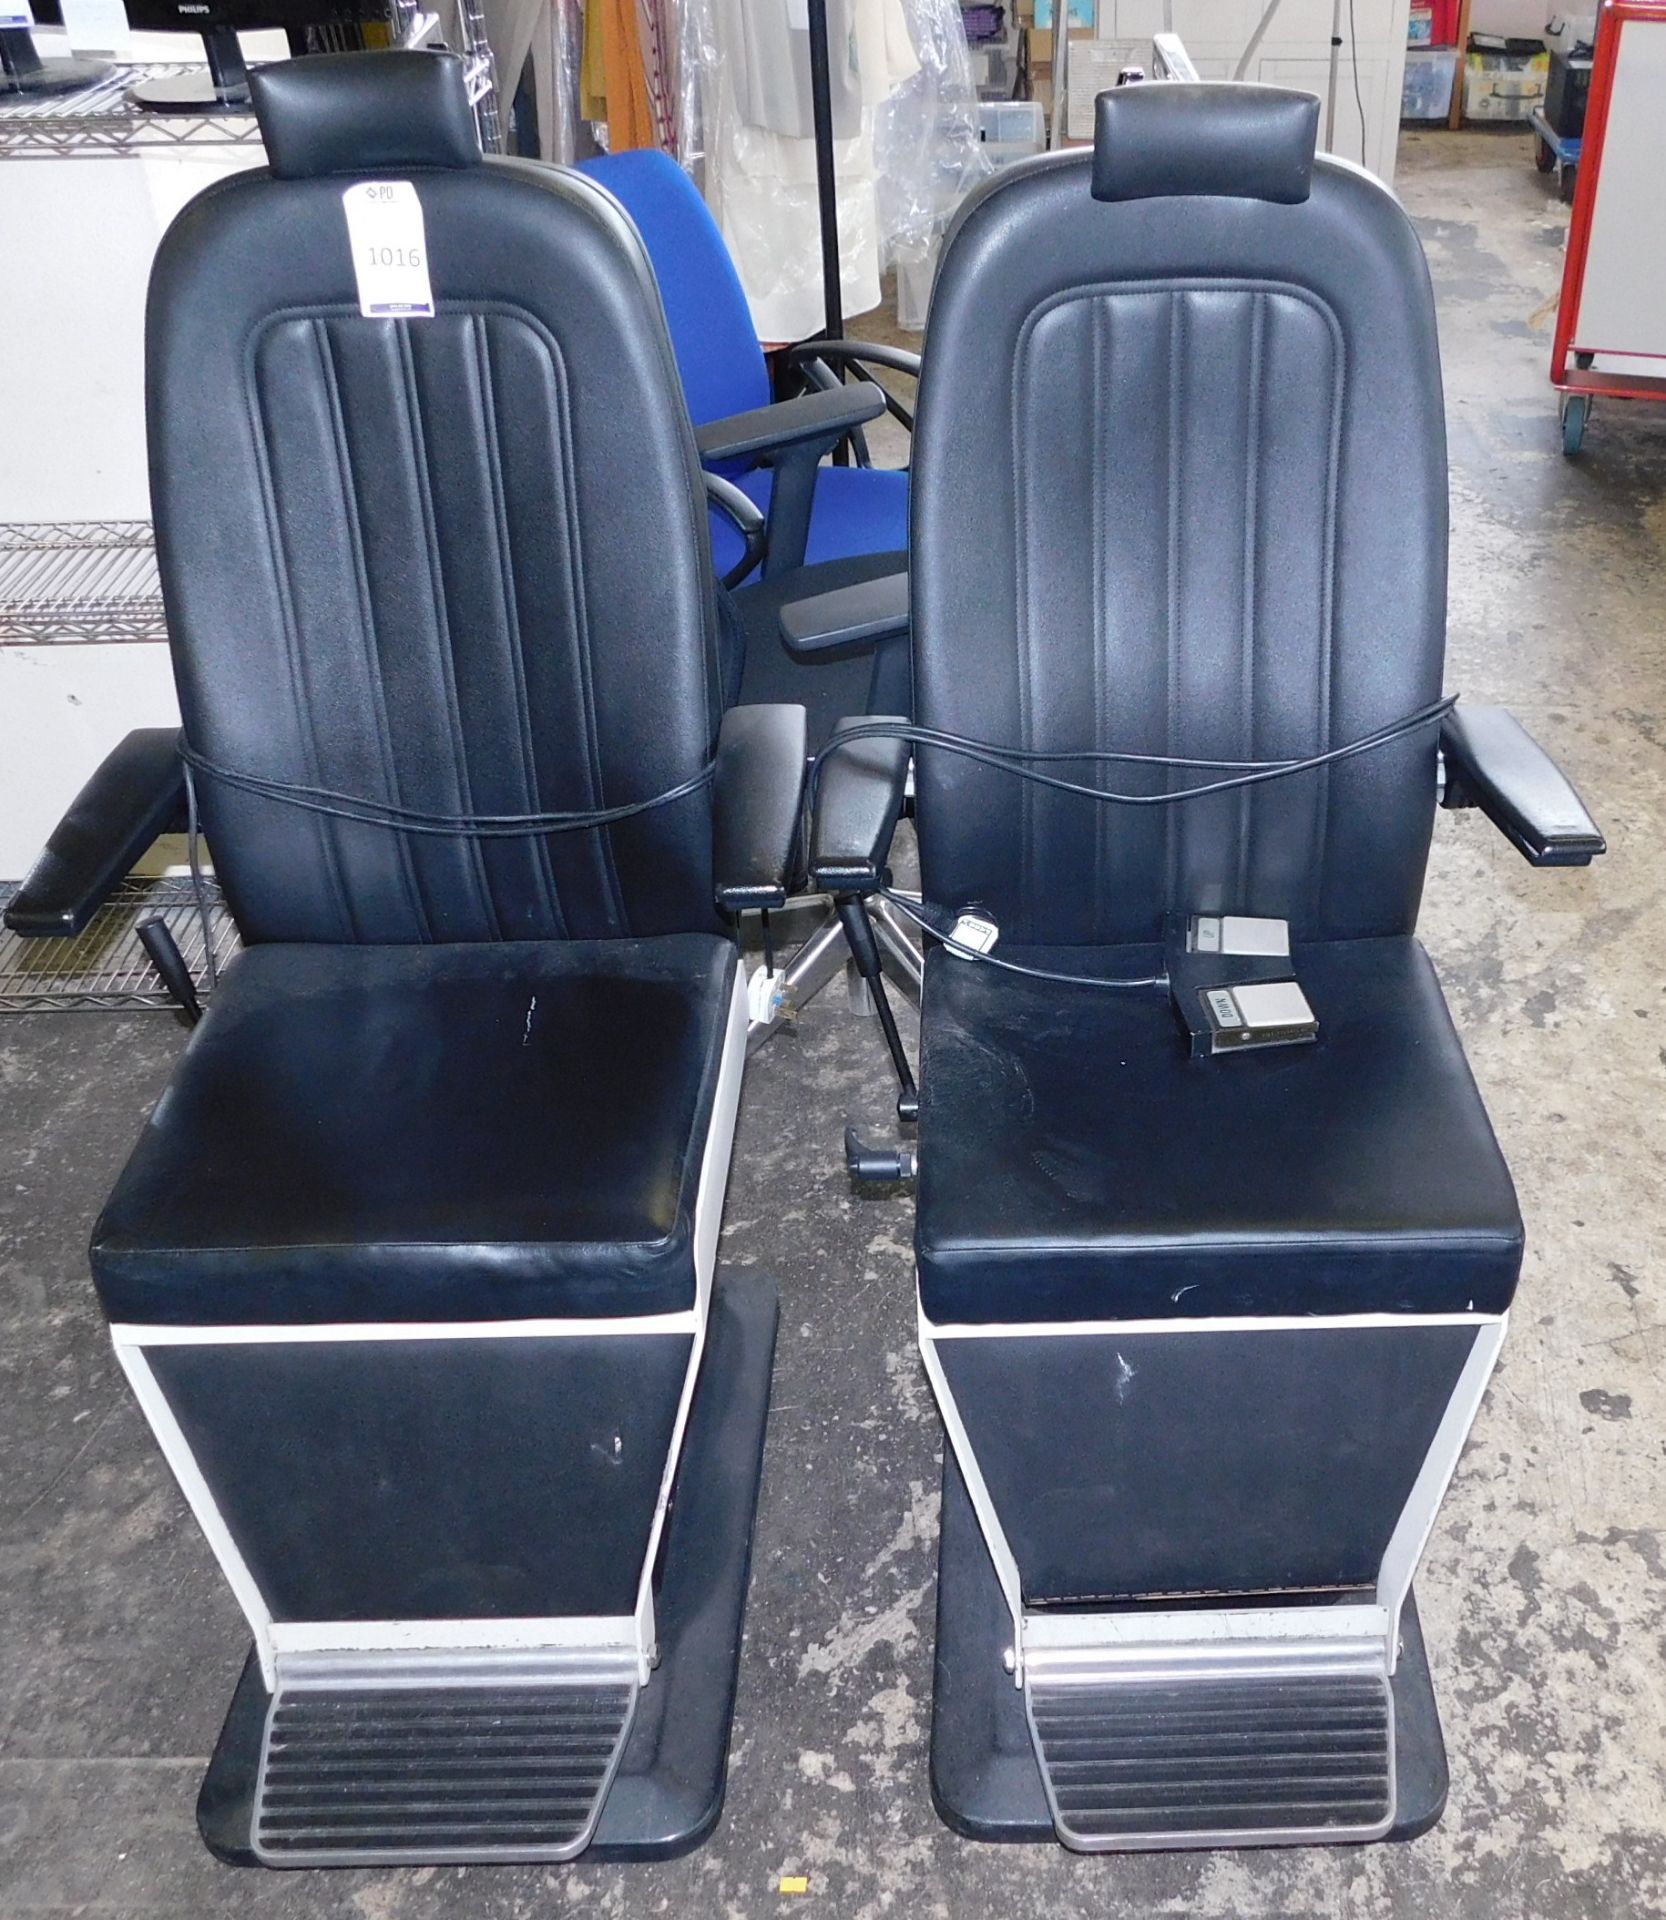 2 Patient Chairs, Electric Powered (Located Stockport – See General Notes for More Details)